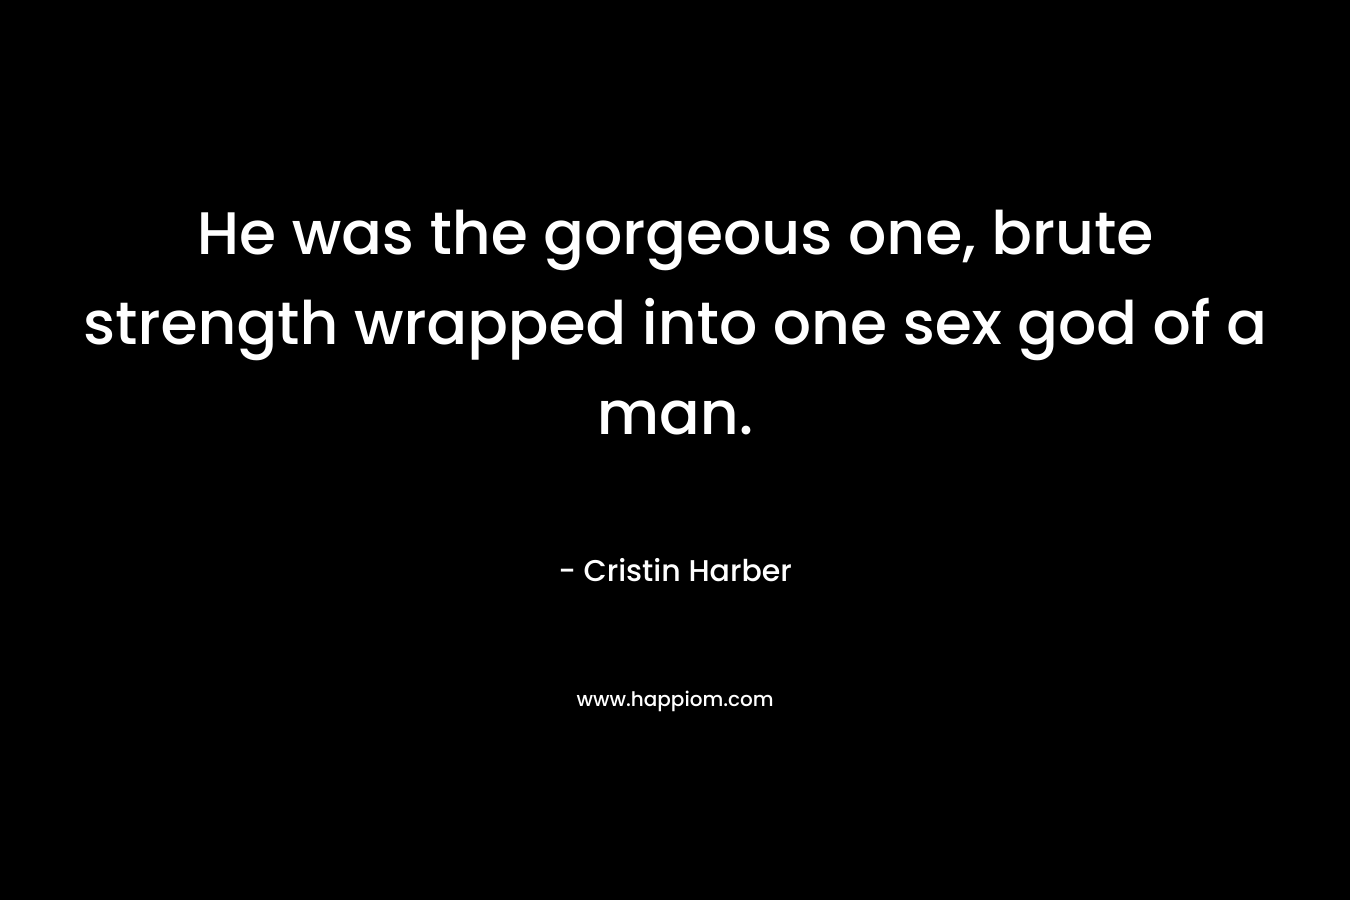 He was the gorgeous one, brute strength wrapped into one sex god of a man.